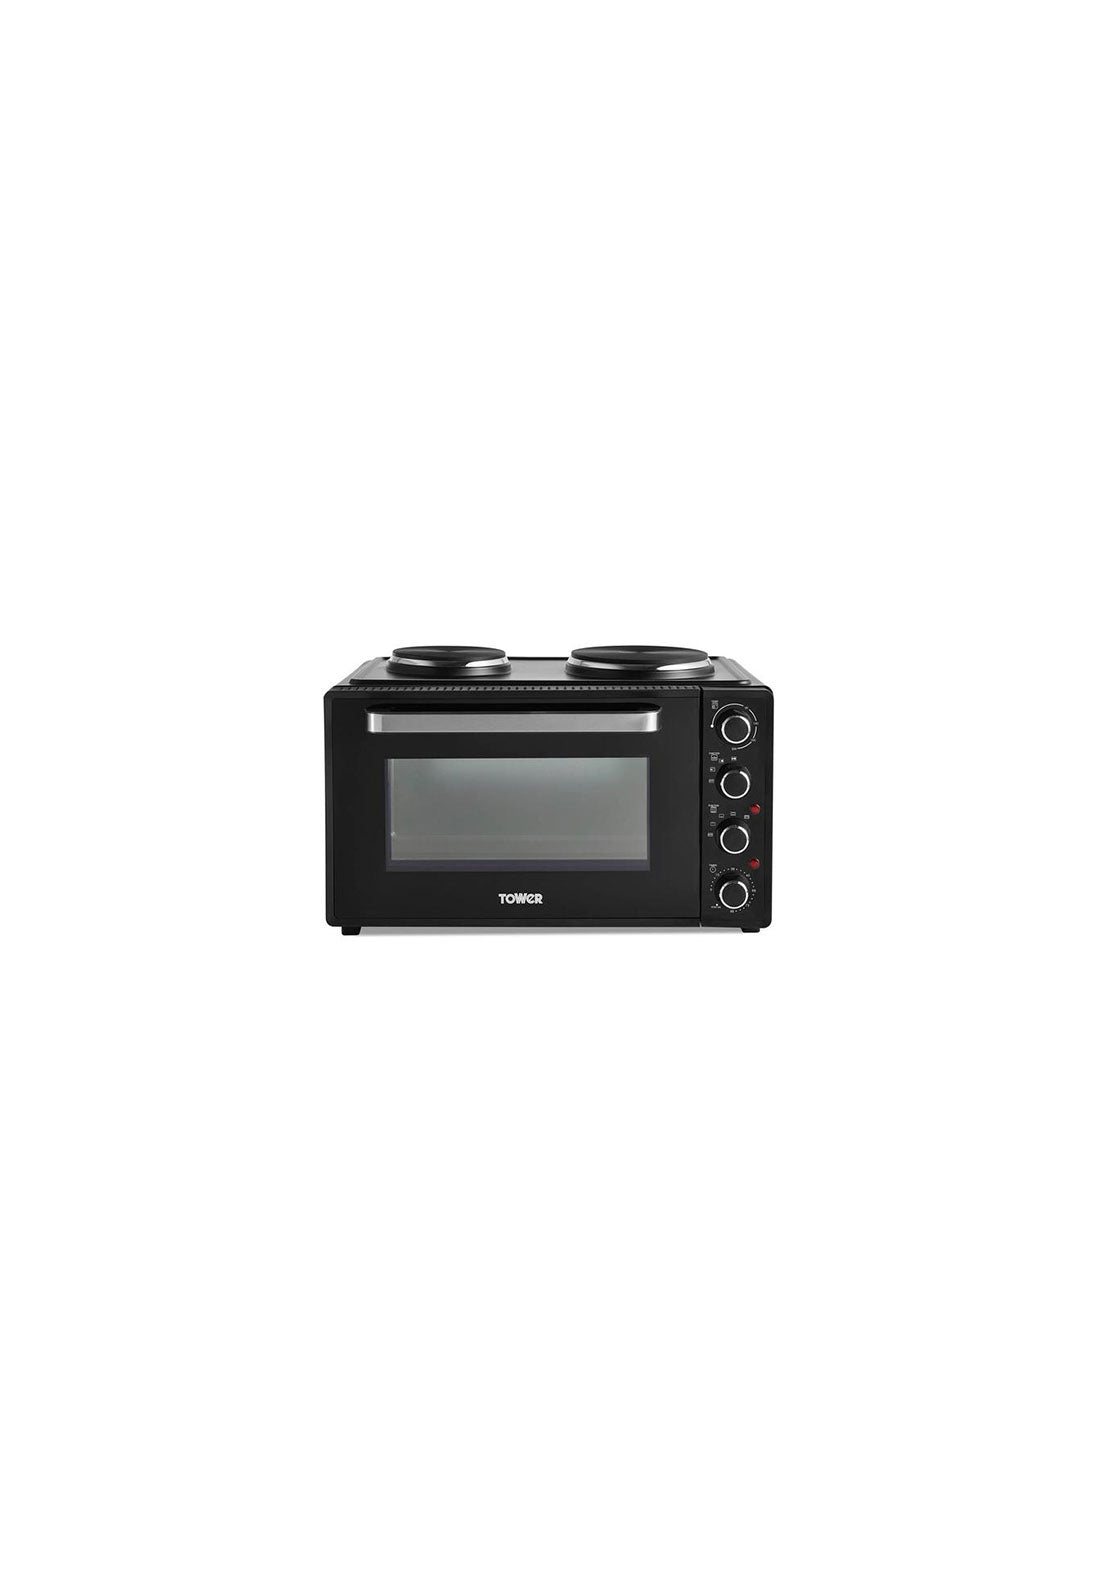 Tower 42L Mini Oven With Hot Plates | T14045 2 Shaws Department Stores